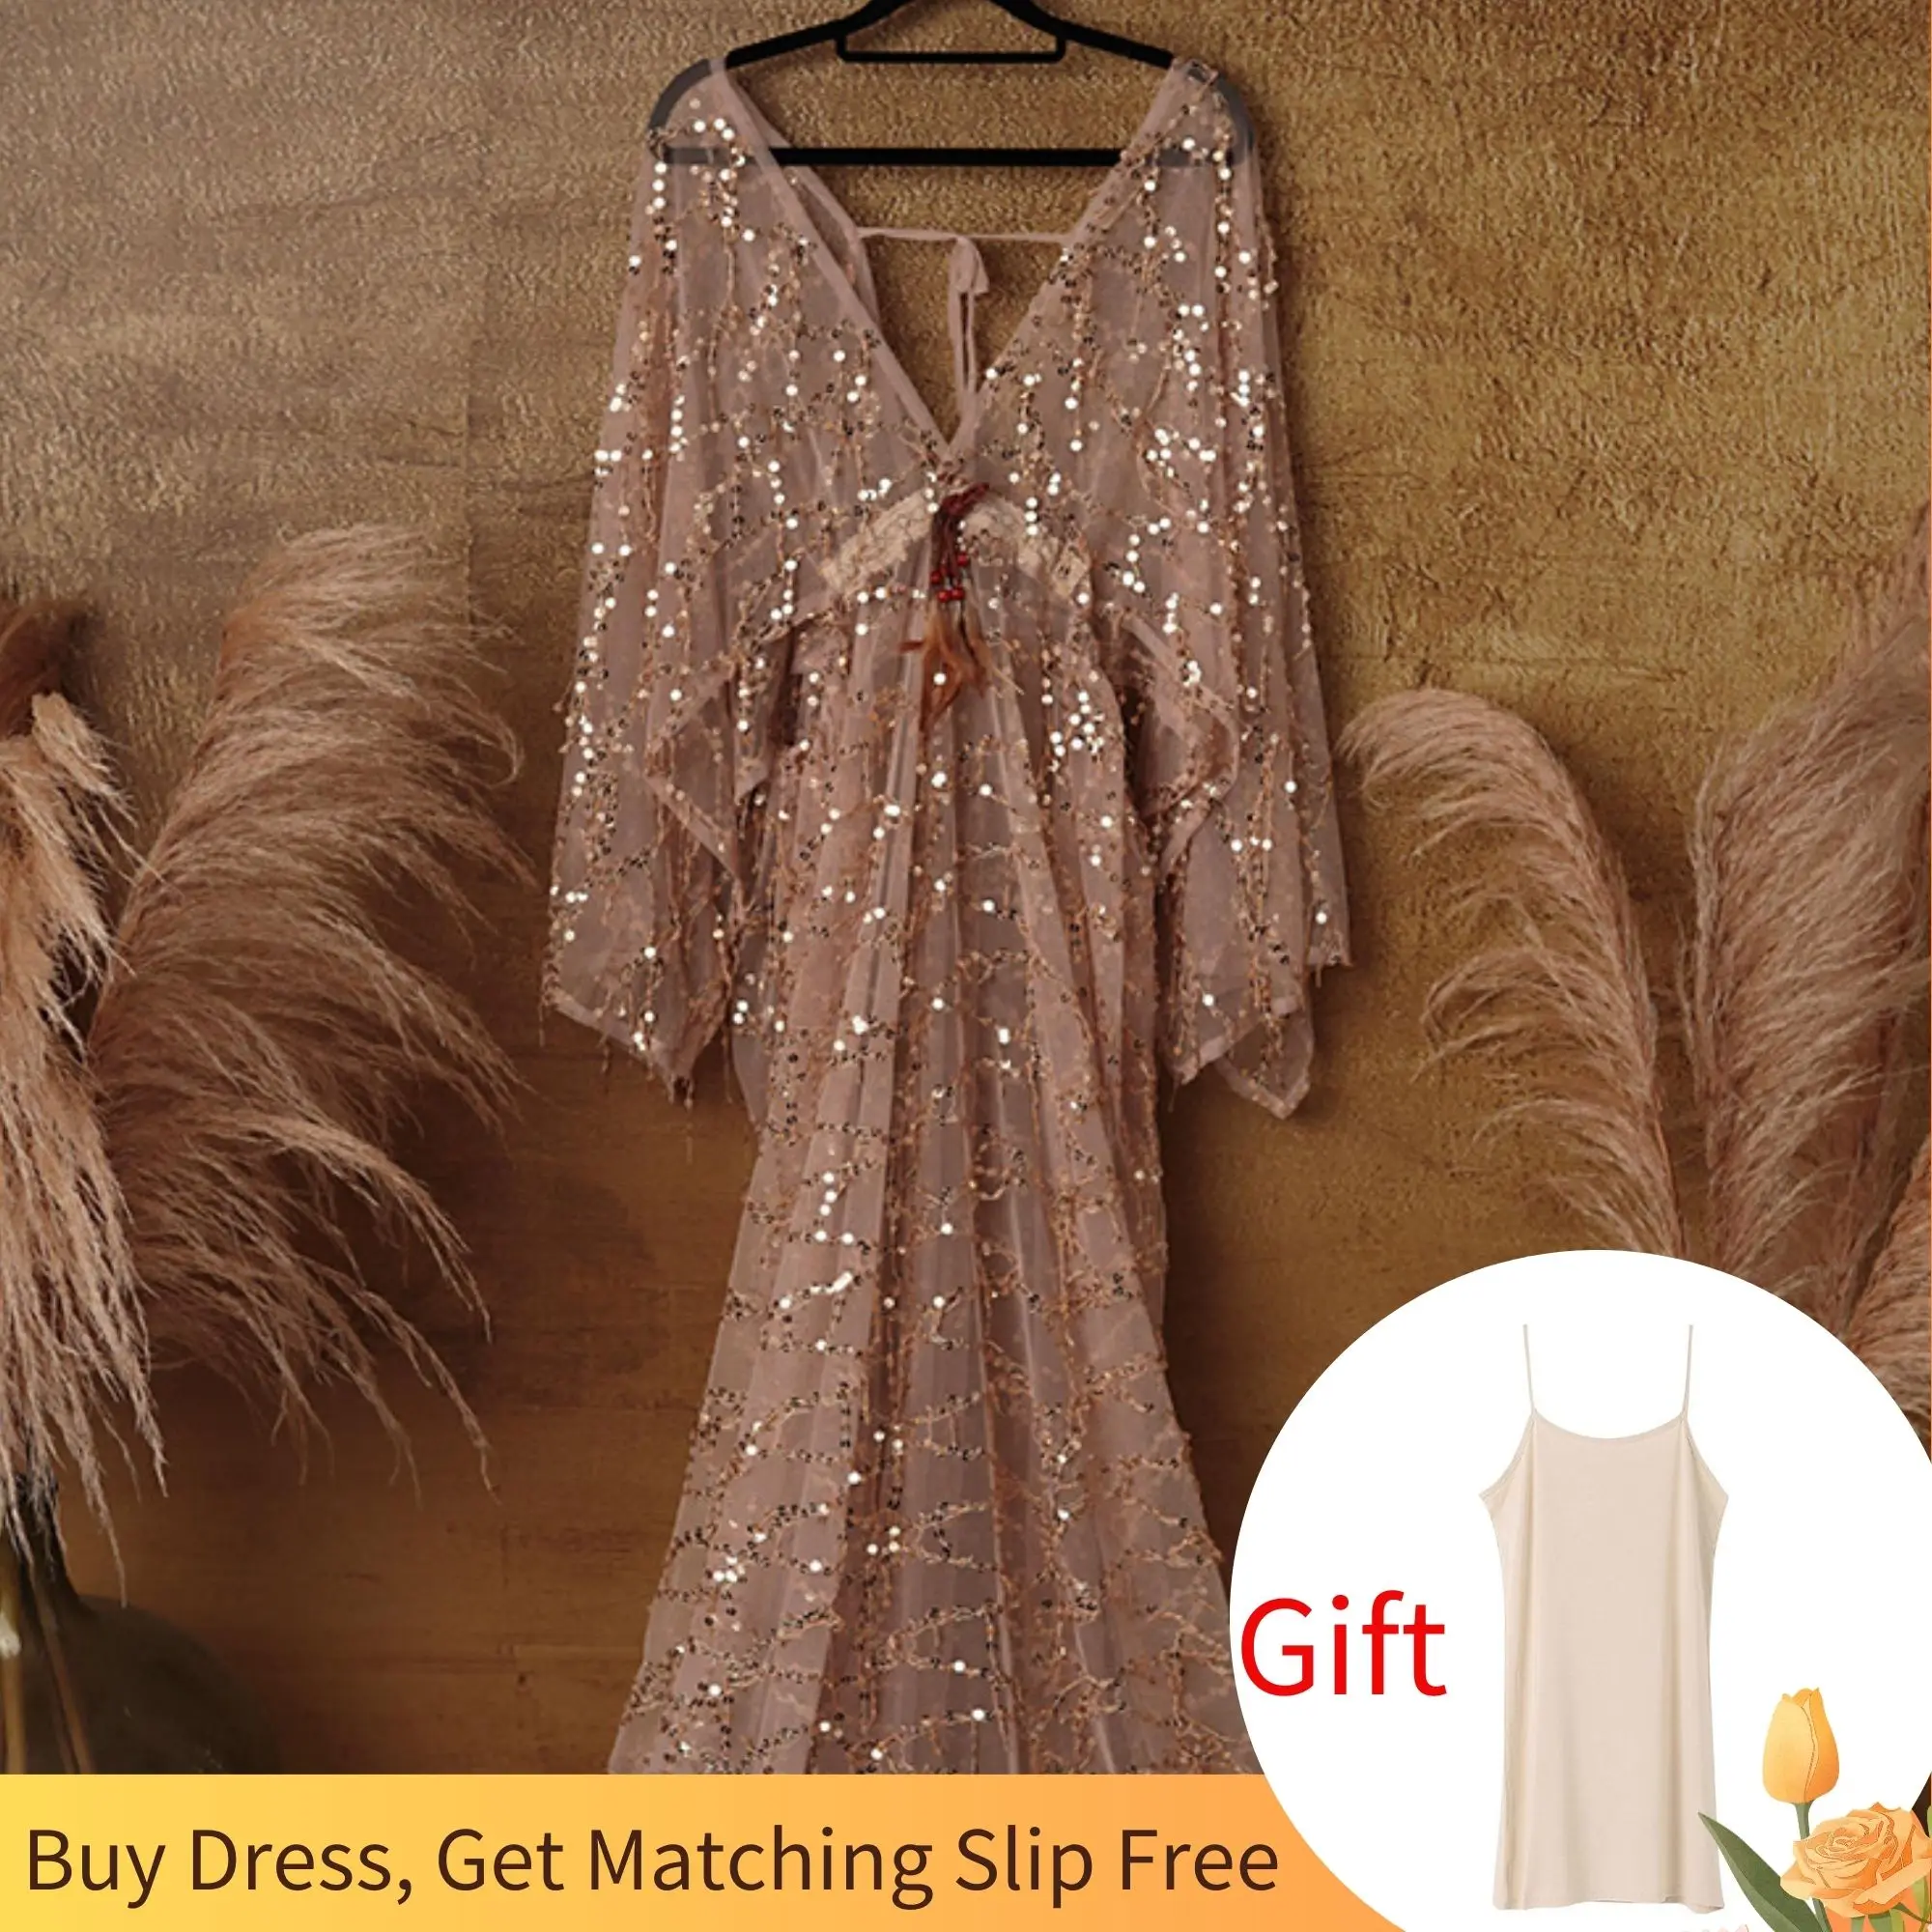 

Don&Judy Boho Sequin Maternity Dress Photoshoot Sparkly Robe Sequin Tulle Maxi Gown Woman Dresses Party Prom Photo Shoot Clothes